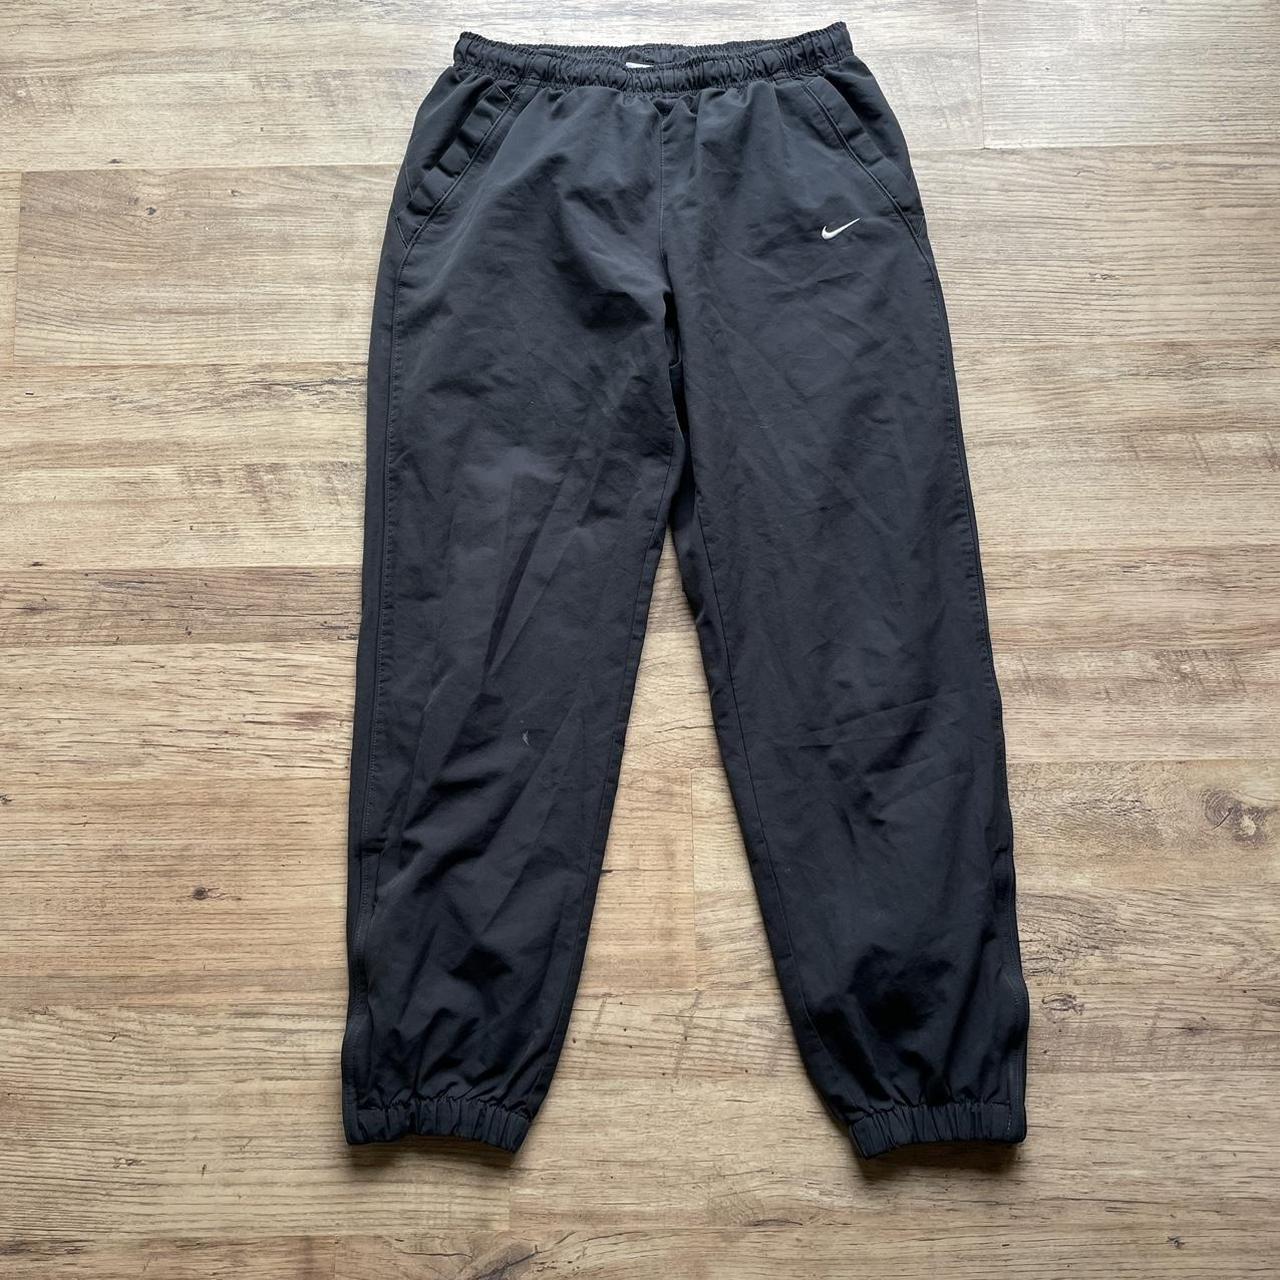 Nike Shell Baggy Track Bottoms in Black Size... - Depop